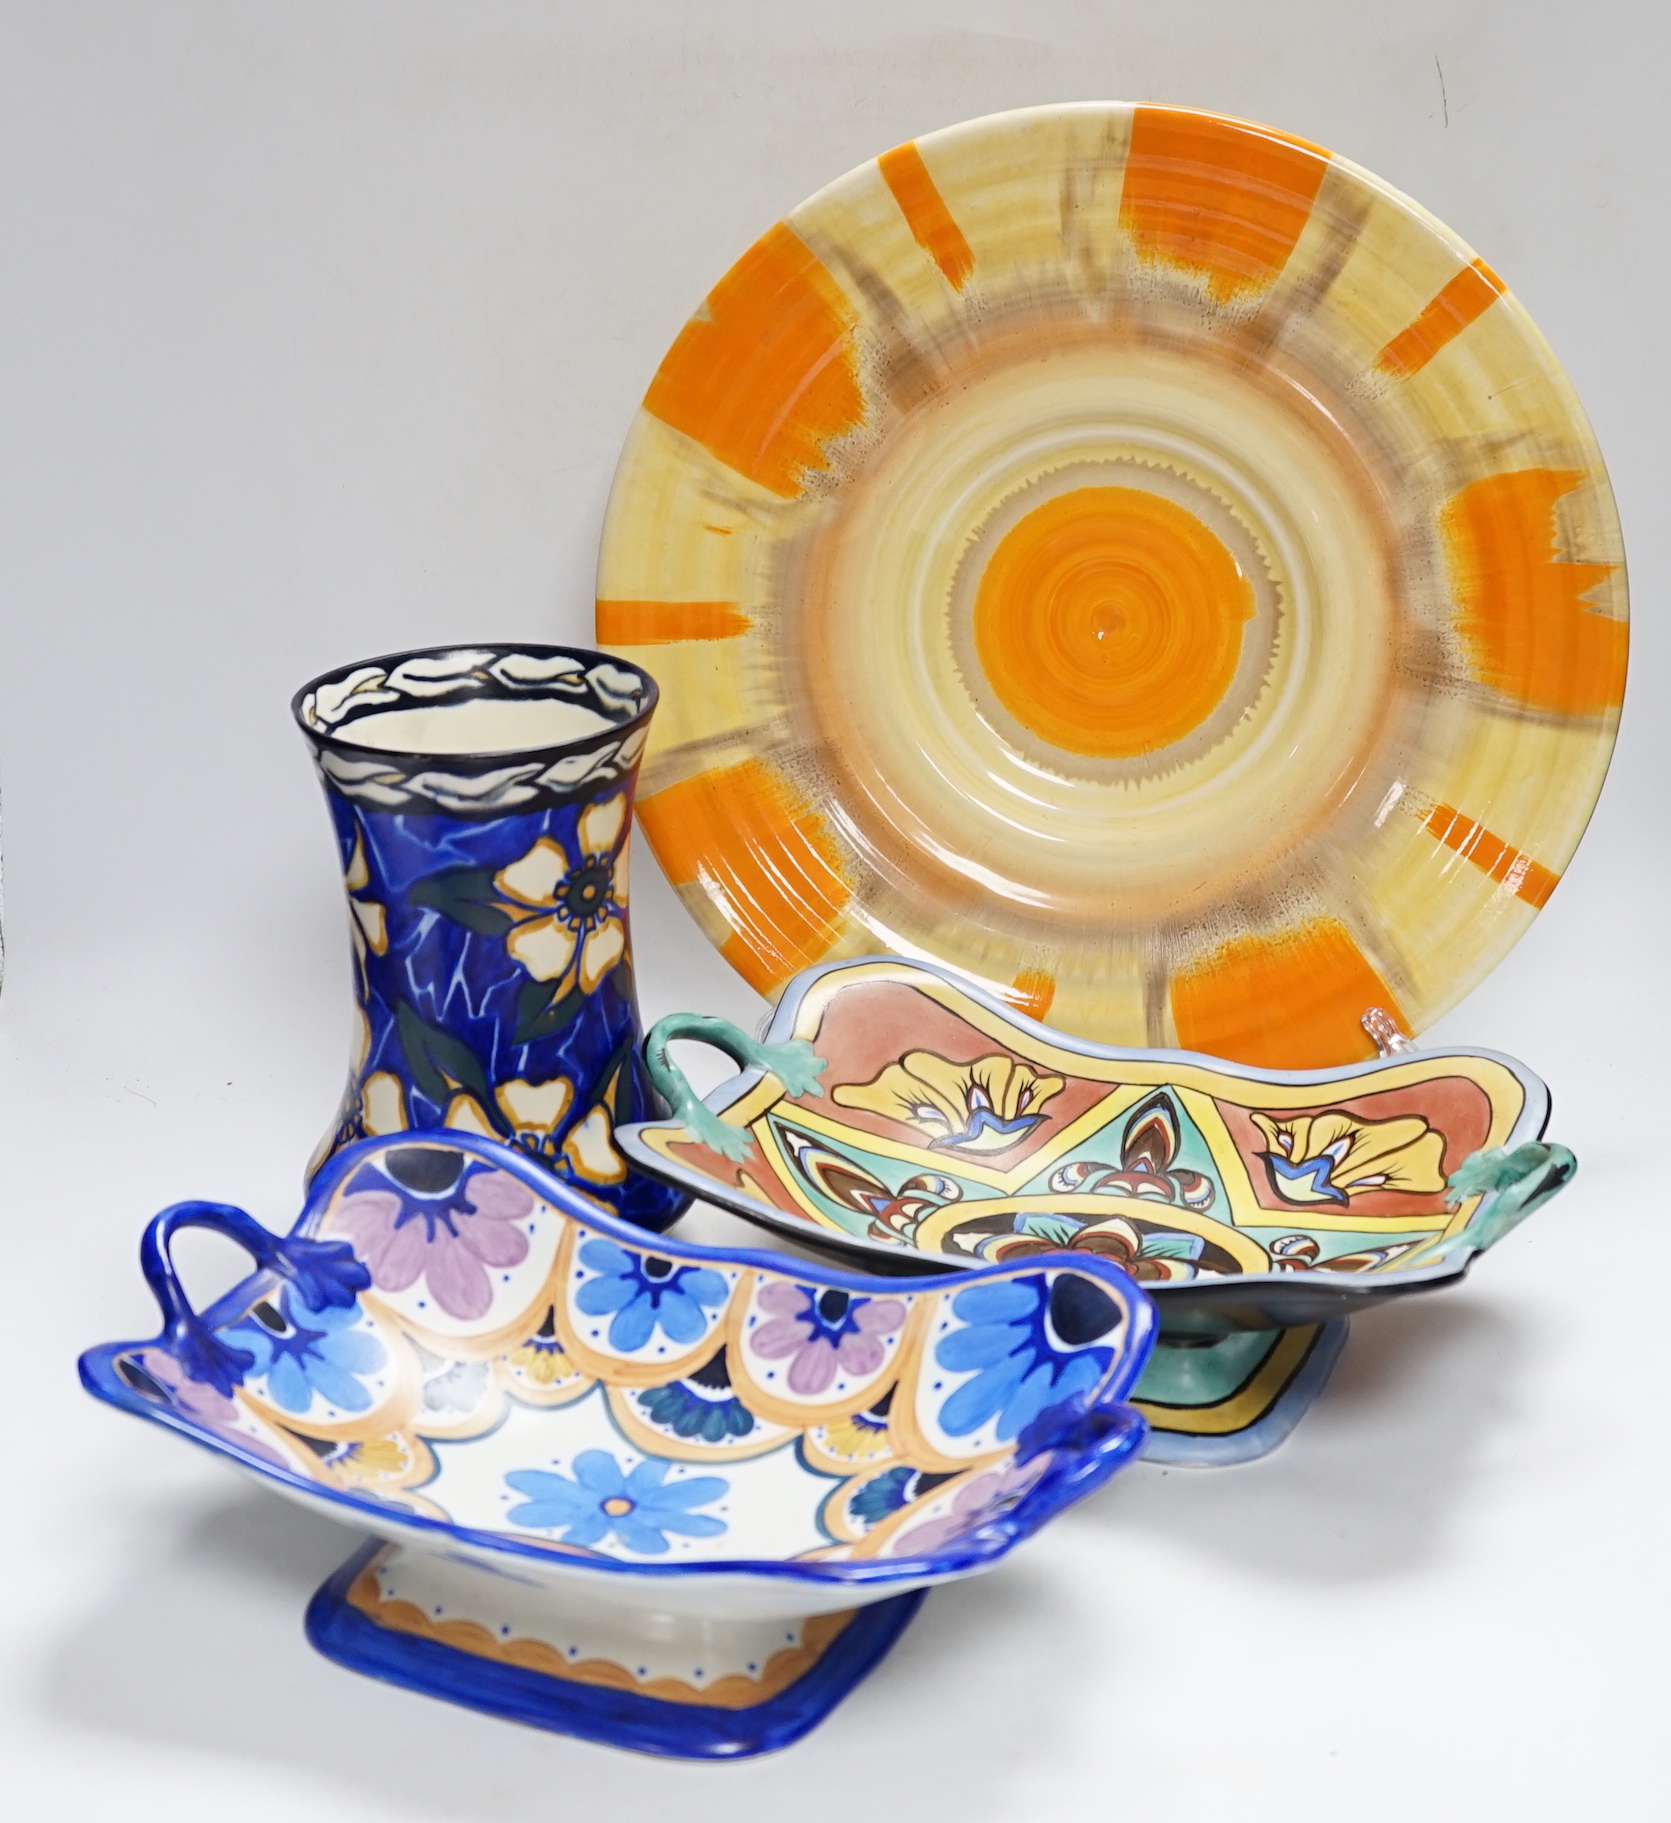 Art Deco ceramics, including two Carltonware dishes, a Shelley plate, and a vase, plate 36cm diameter